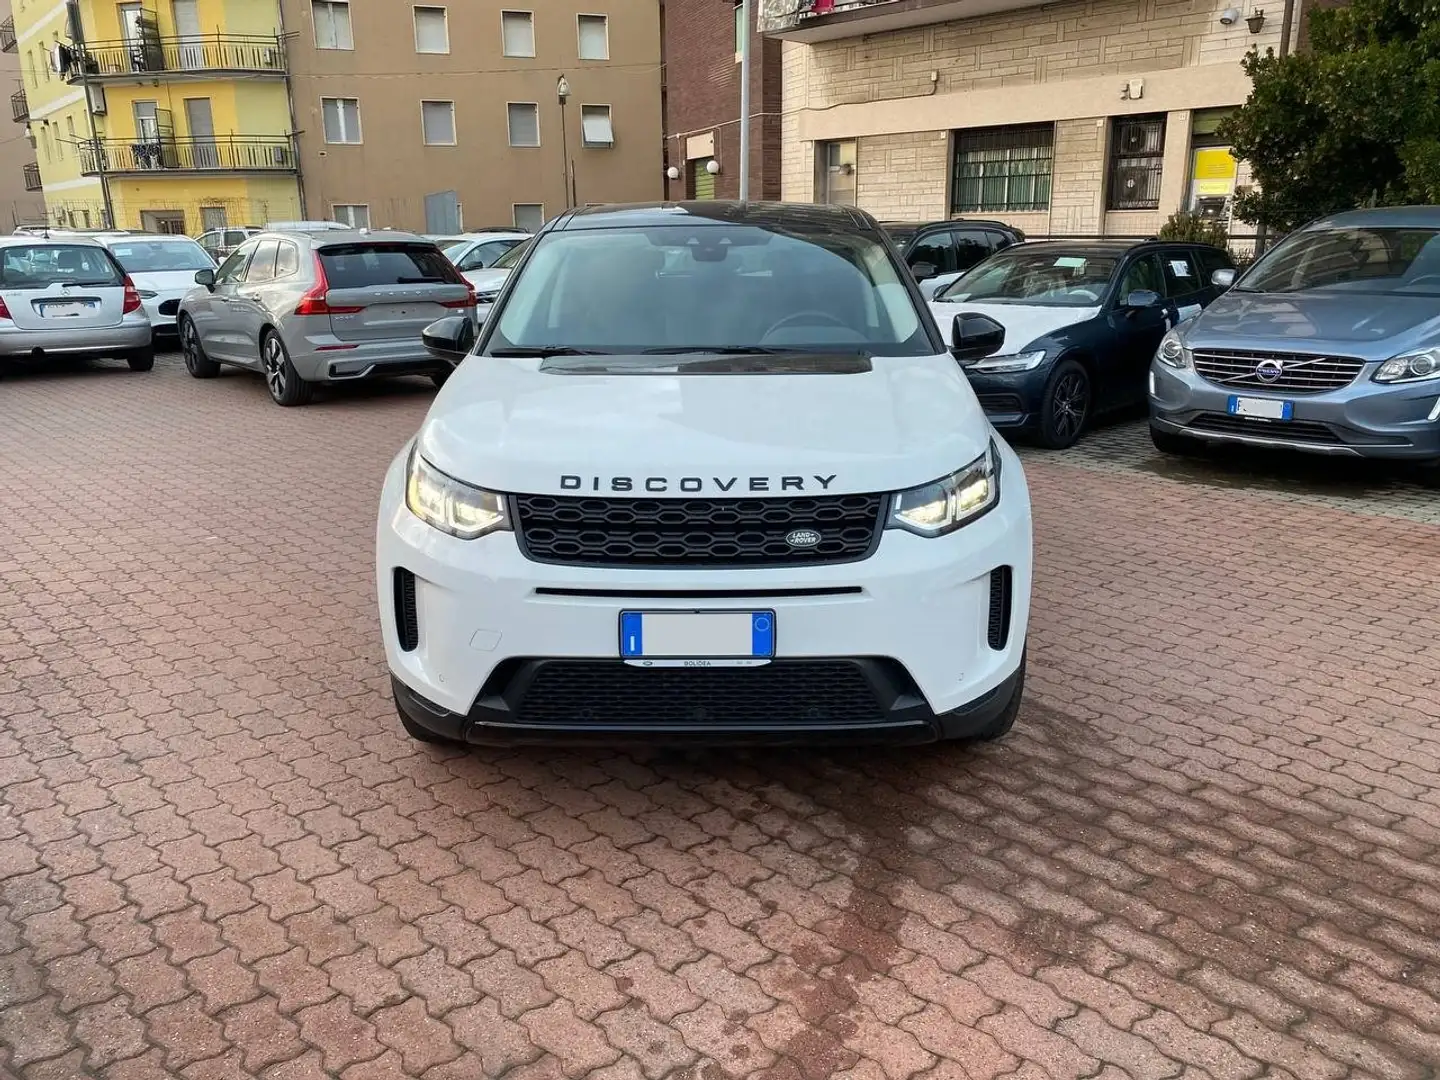 Land Rover Discovery Sport S 2.0d i4 MILD HYBRID AWD-Iva Deducubile-UNIPROP Bianco - 2